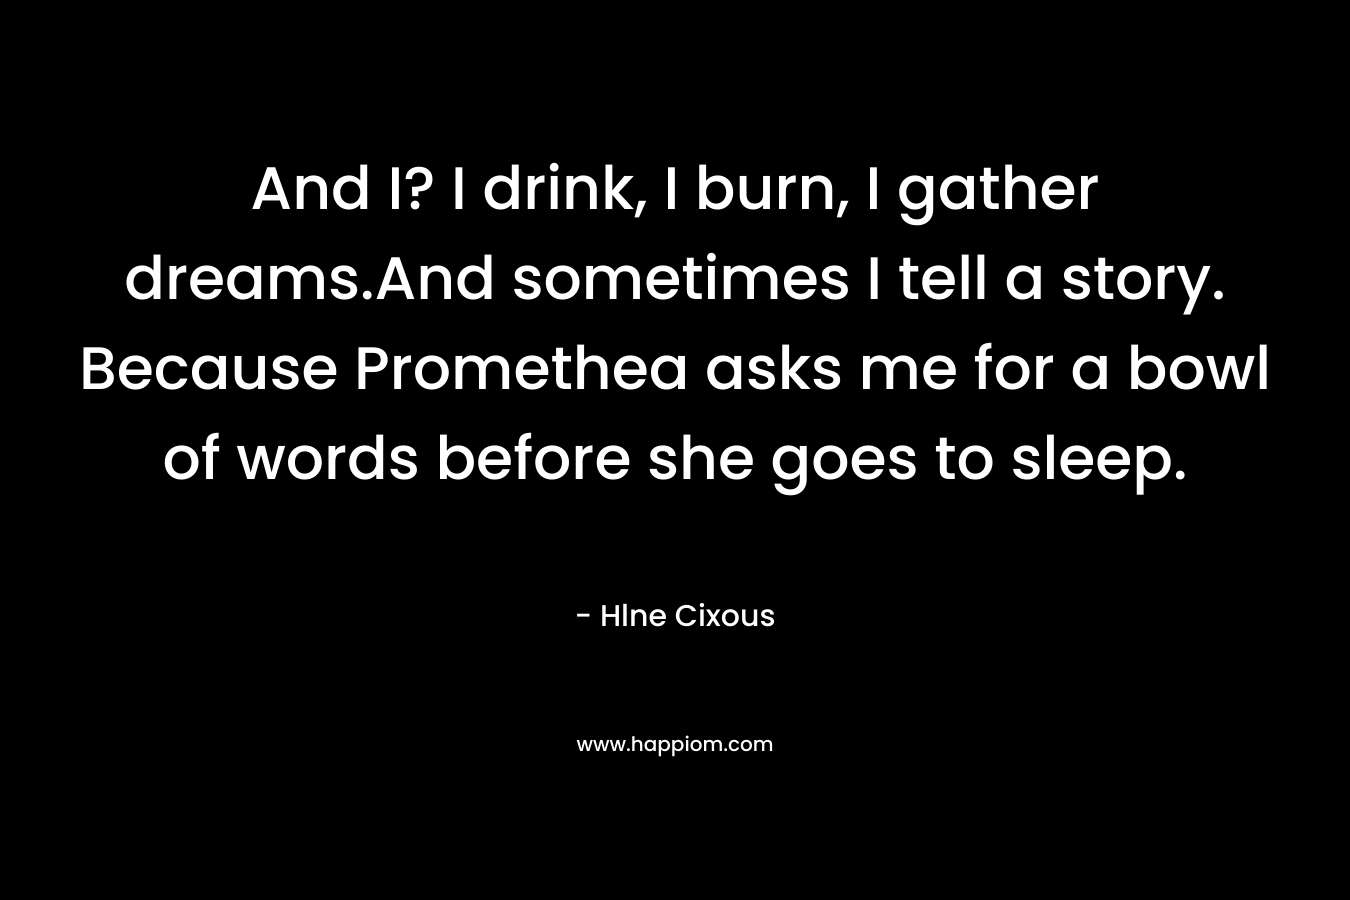 And I? I drink, I burn, I gather dreams.And sometimes I tell a story. Because Promethea asks me for a bowl of words before she goes to sleep. – Hlne Cixous